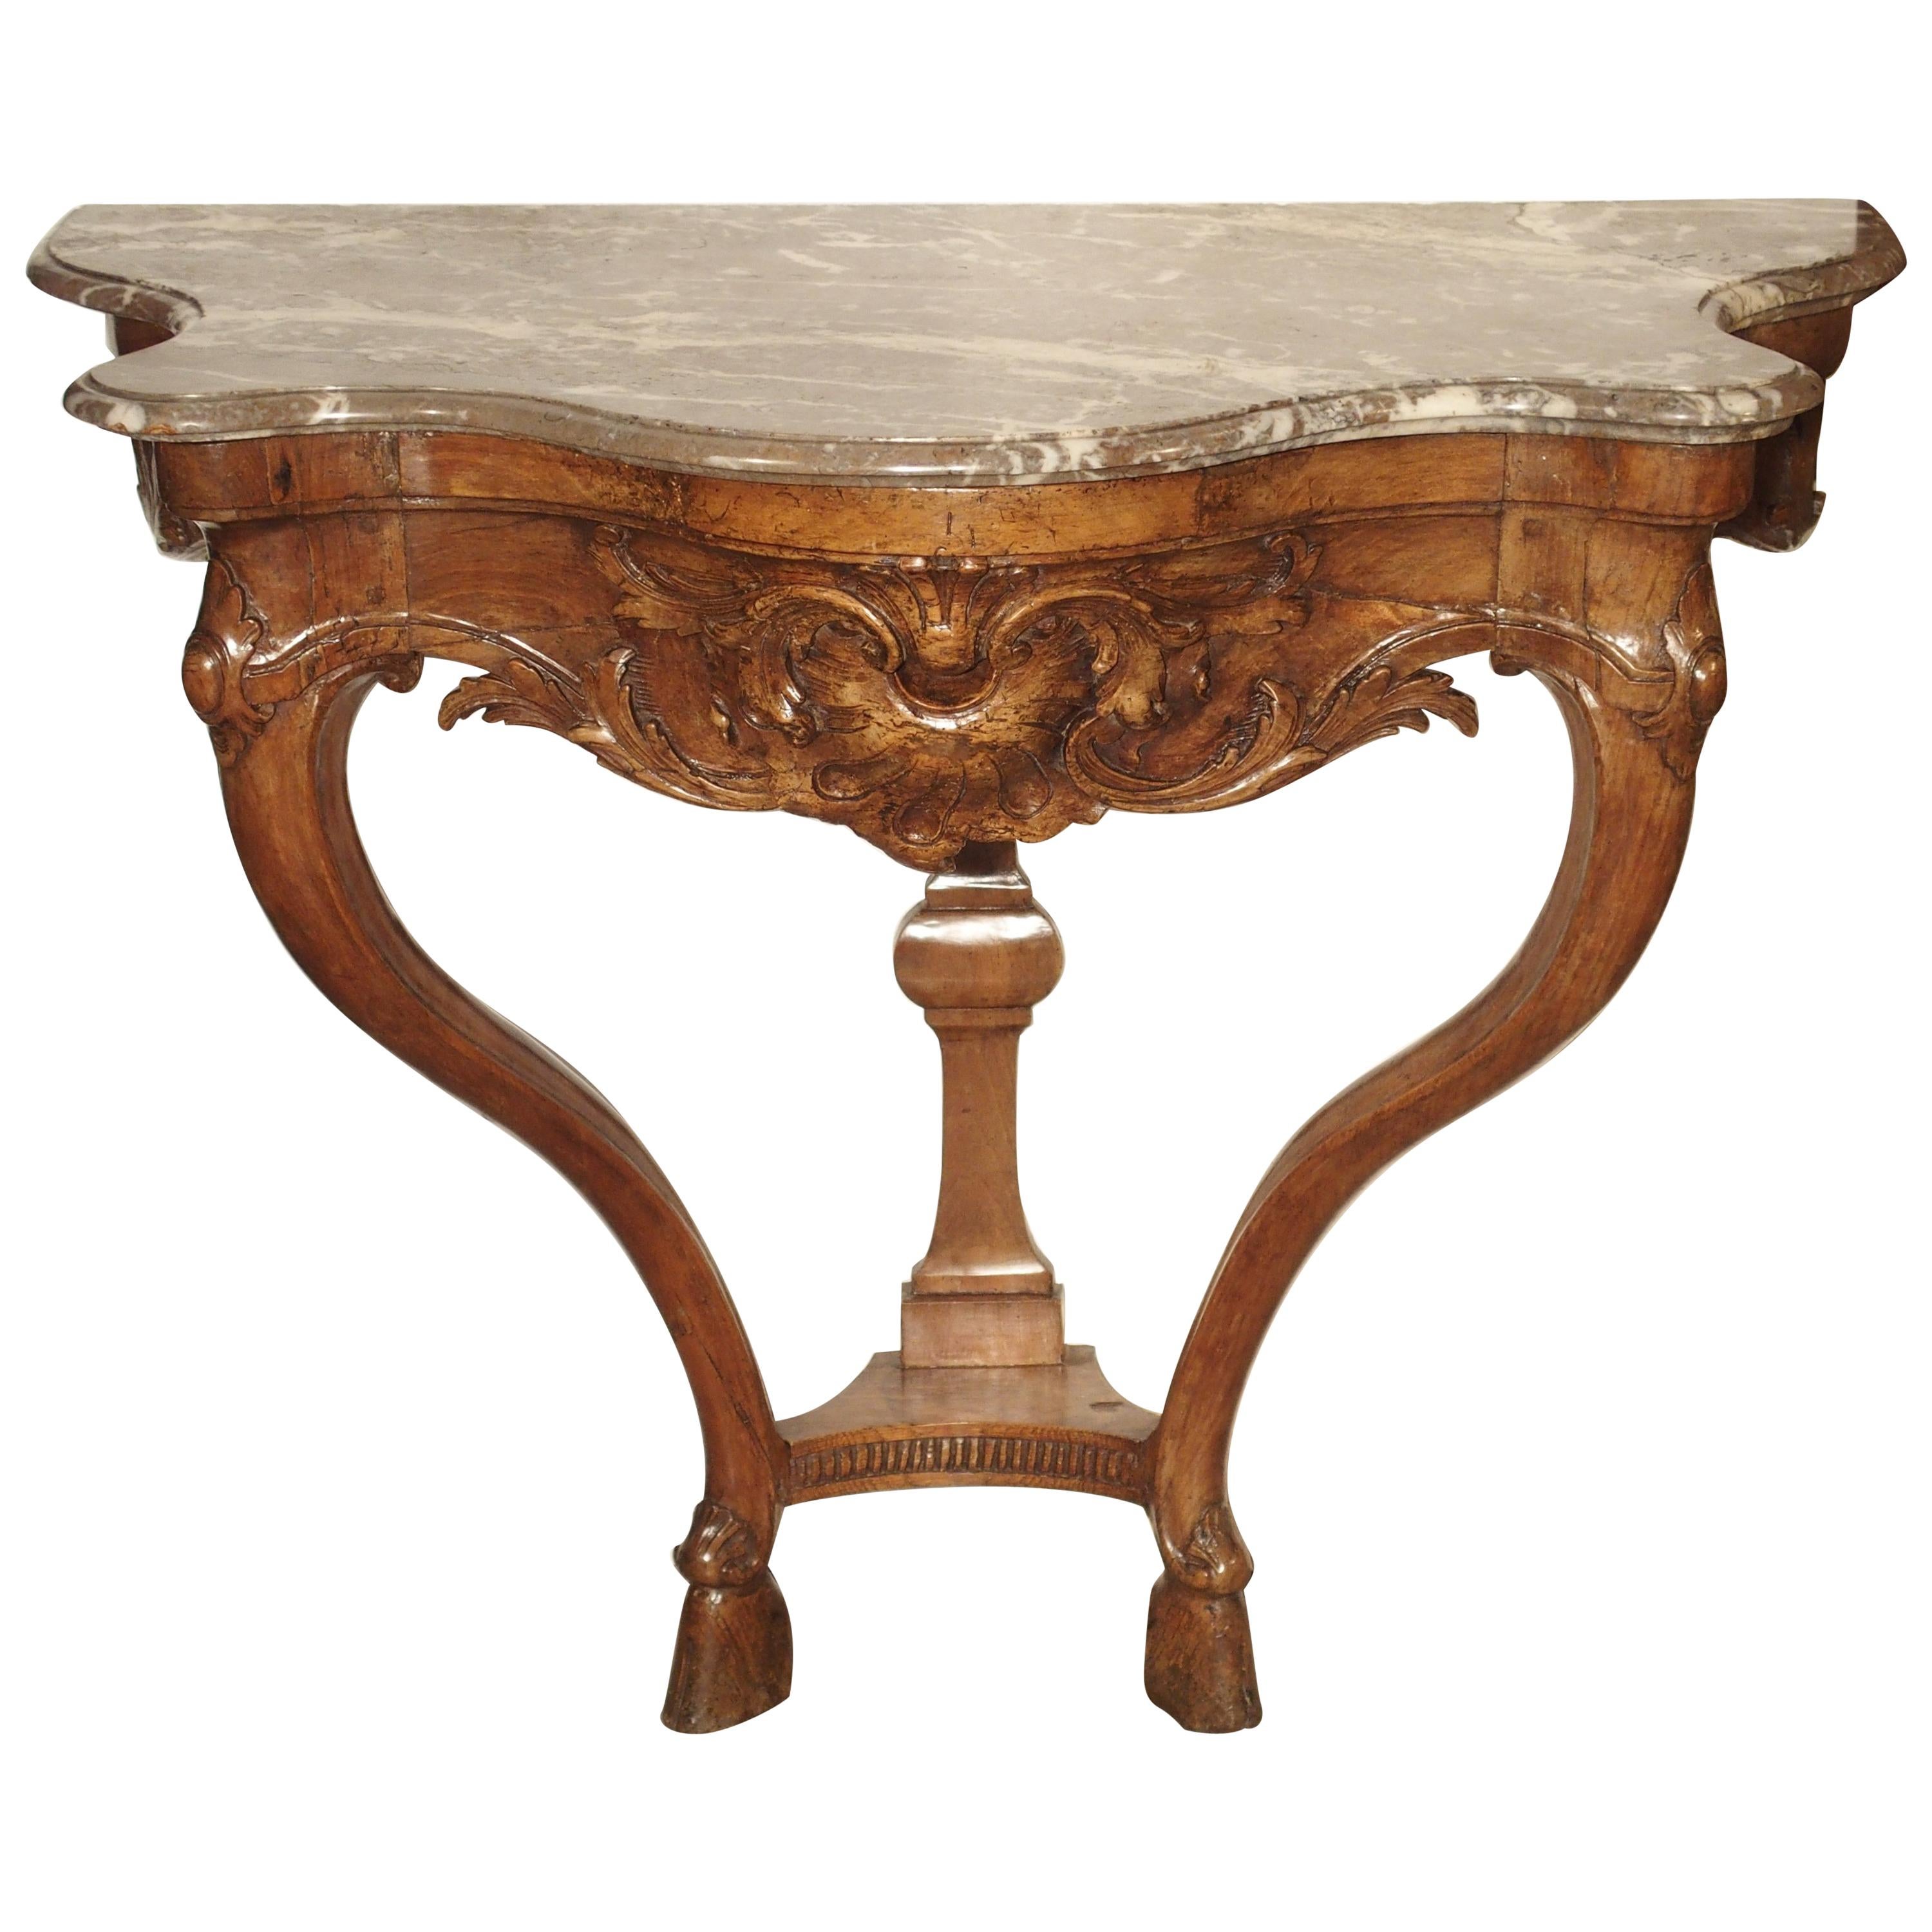 Beautiful French Marble Topped Antique Wooden Console from the Regence Period